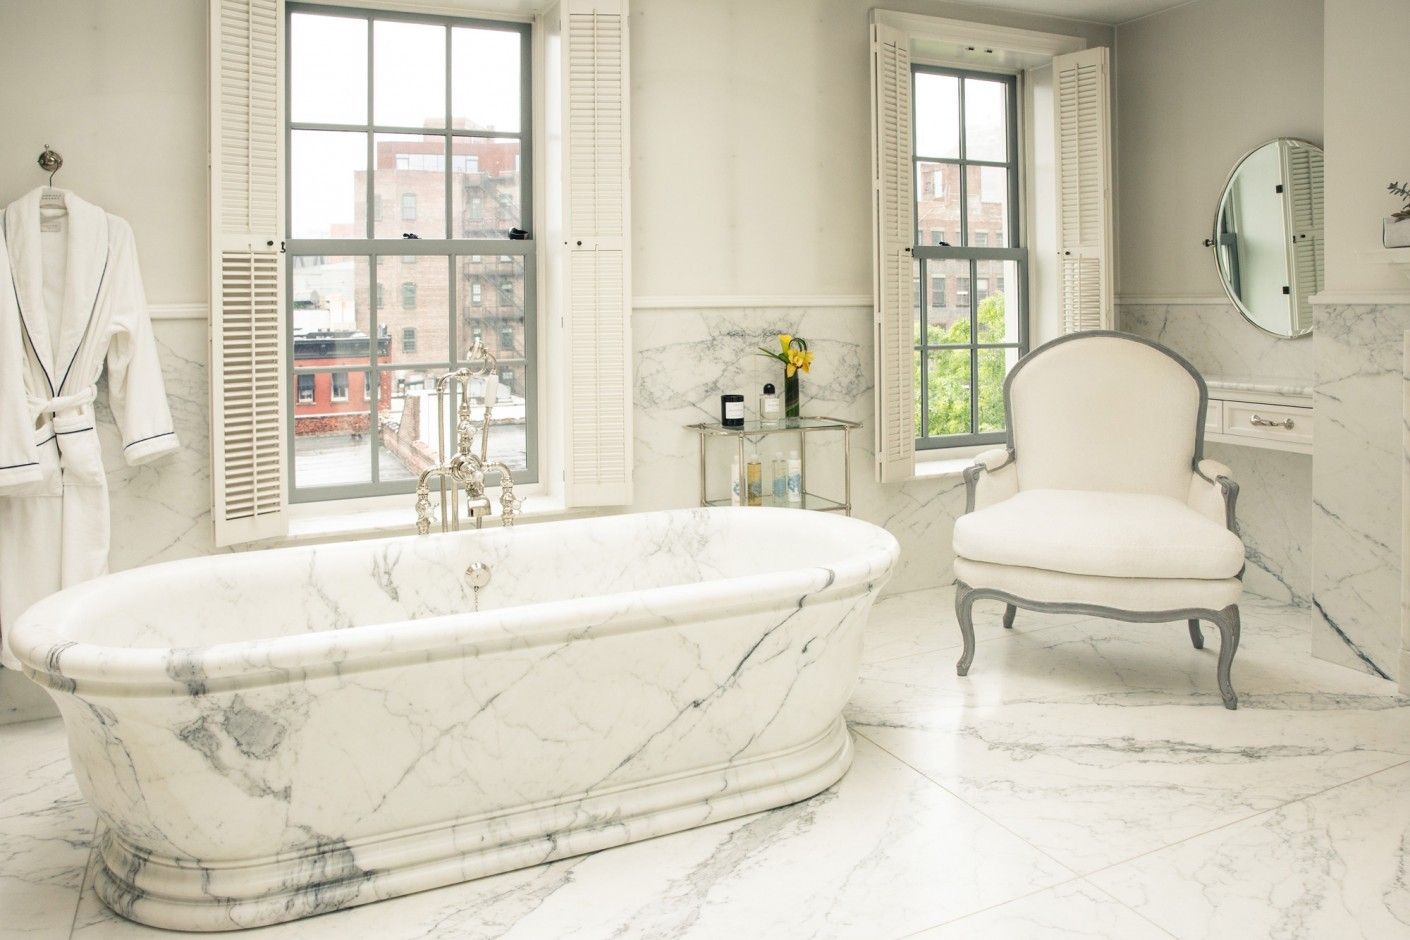 How Can I Make My Bathroom Look Expensive? 10 Designer Tips